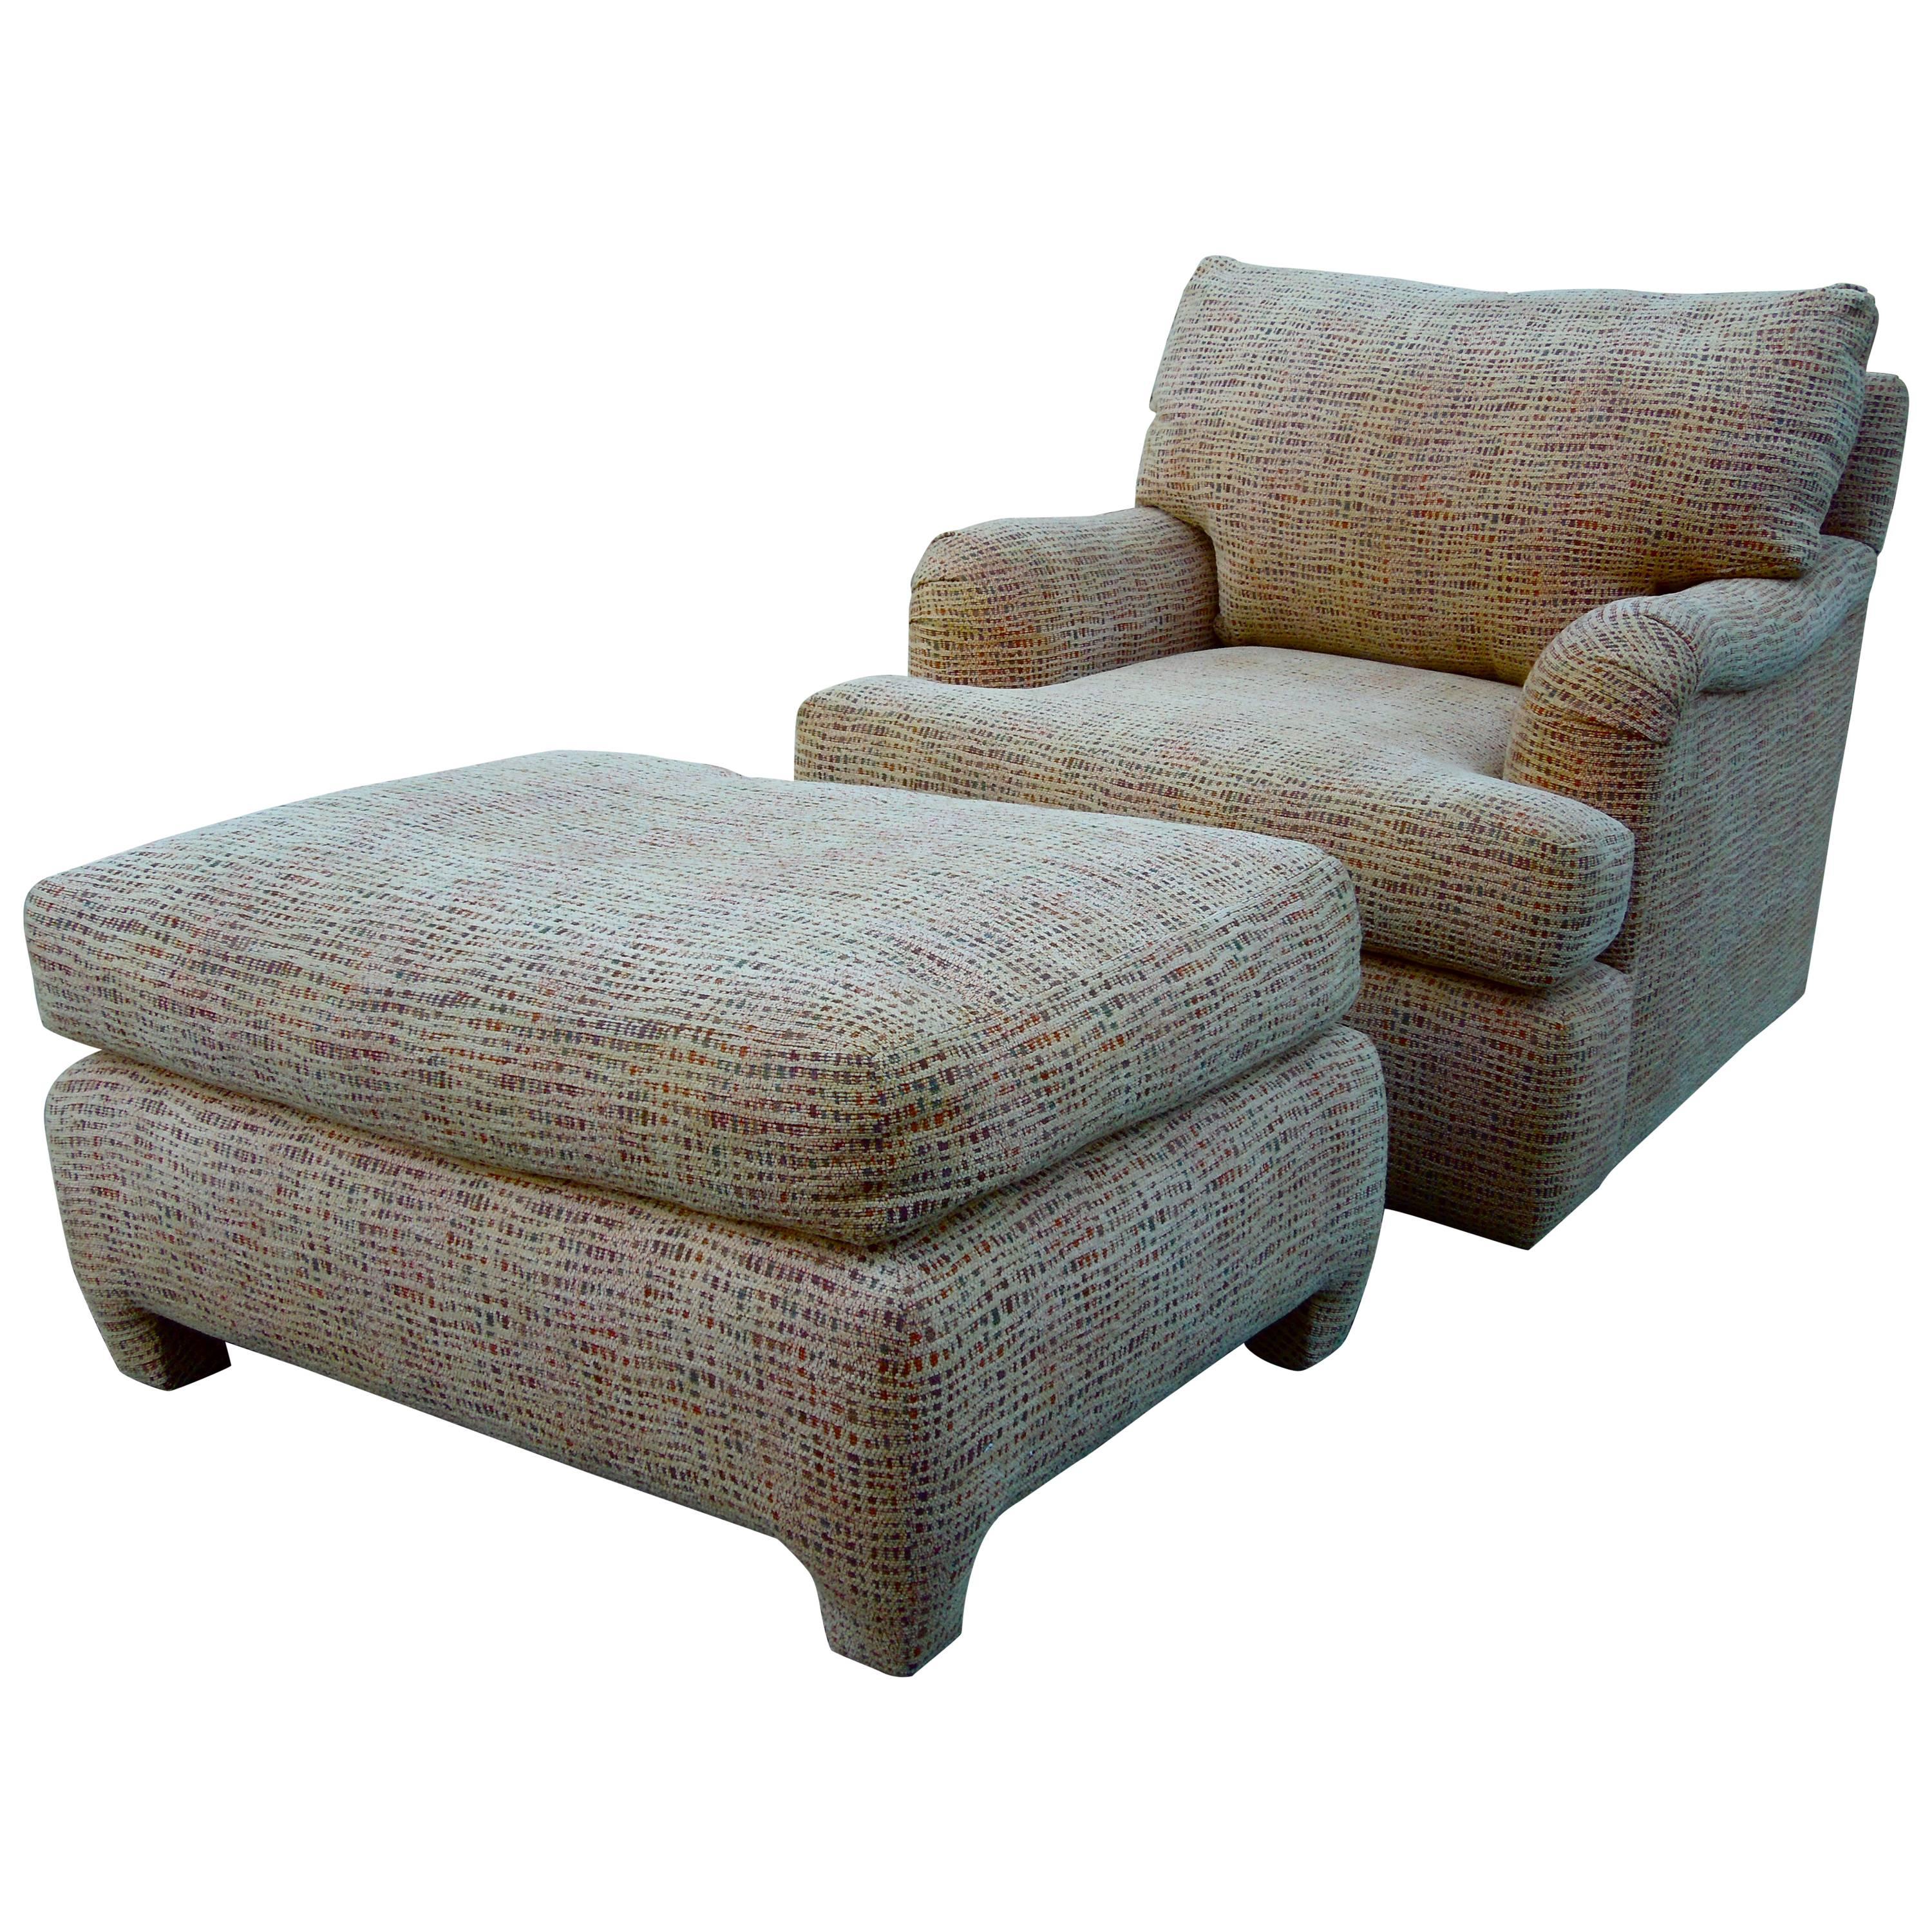 Swivel Club Chair and Matching Ottoman Designed by Gina B